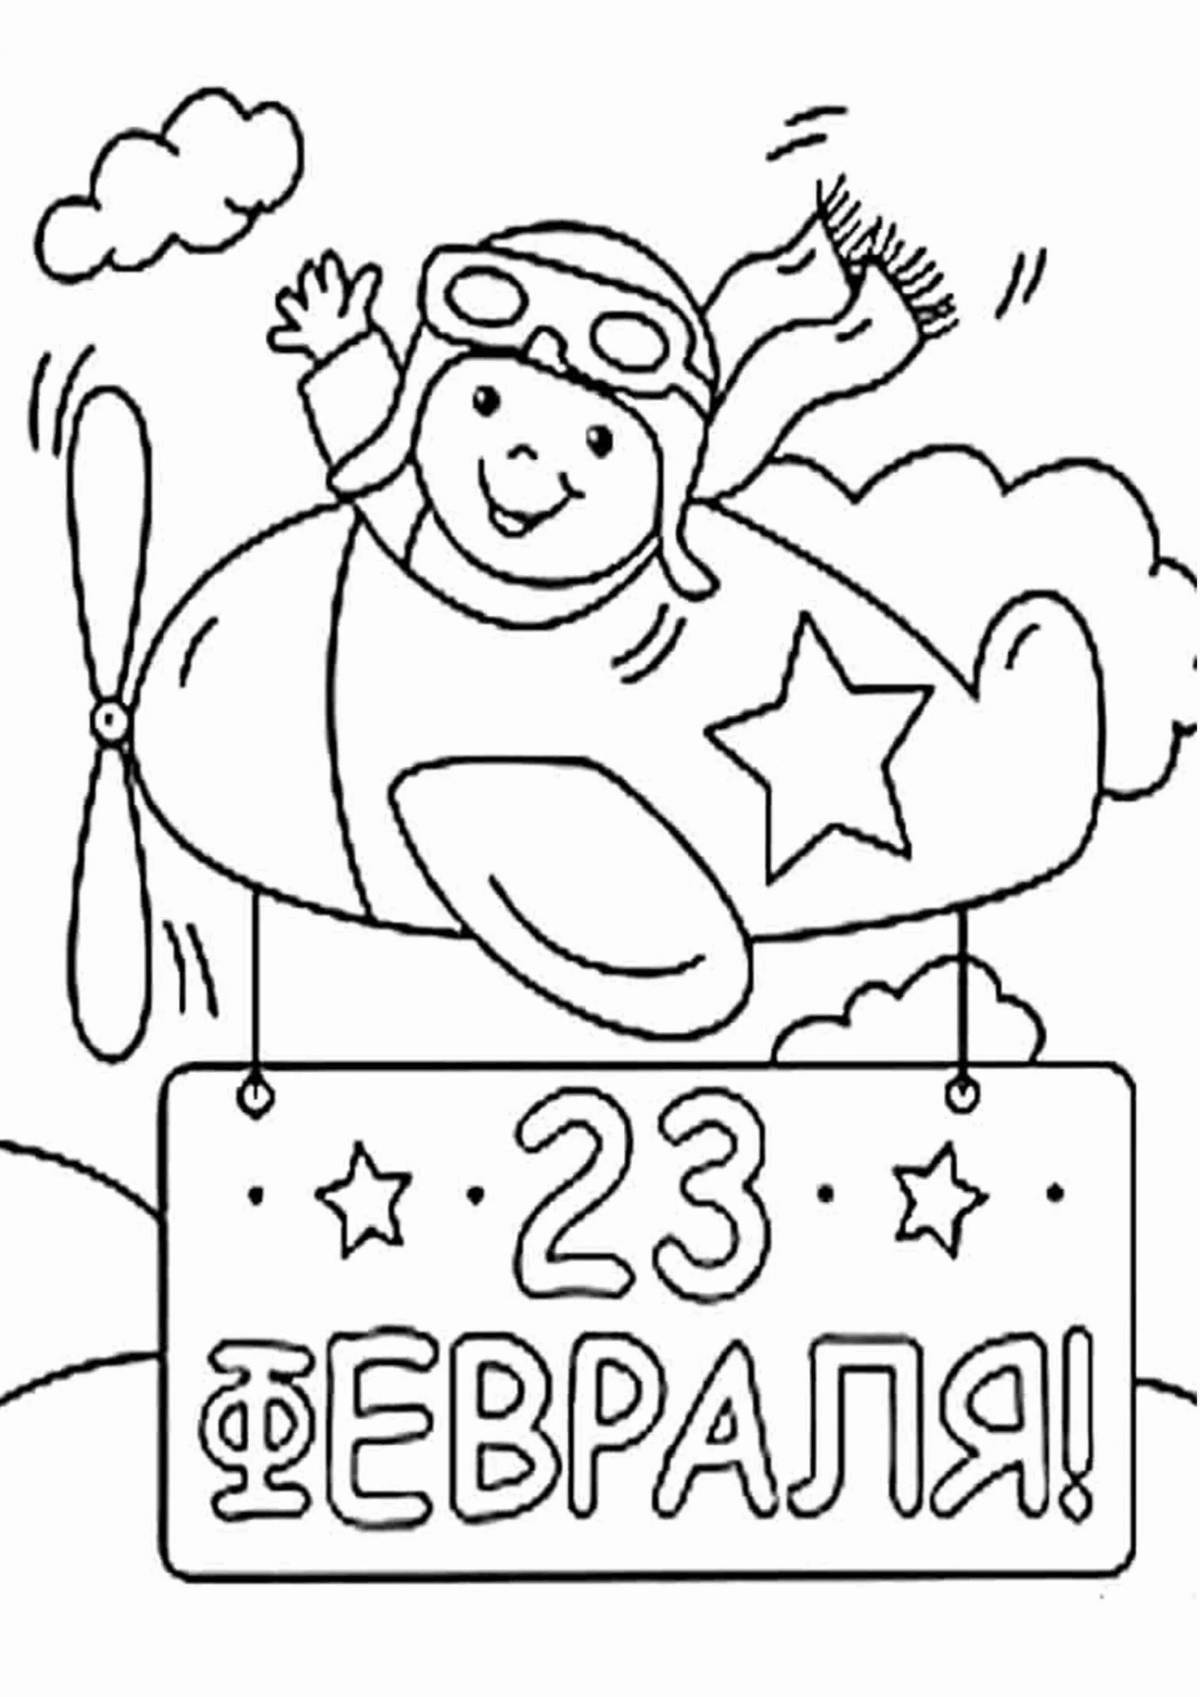 Coloring page flickering February 23